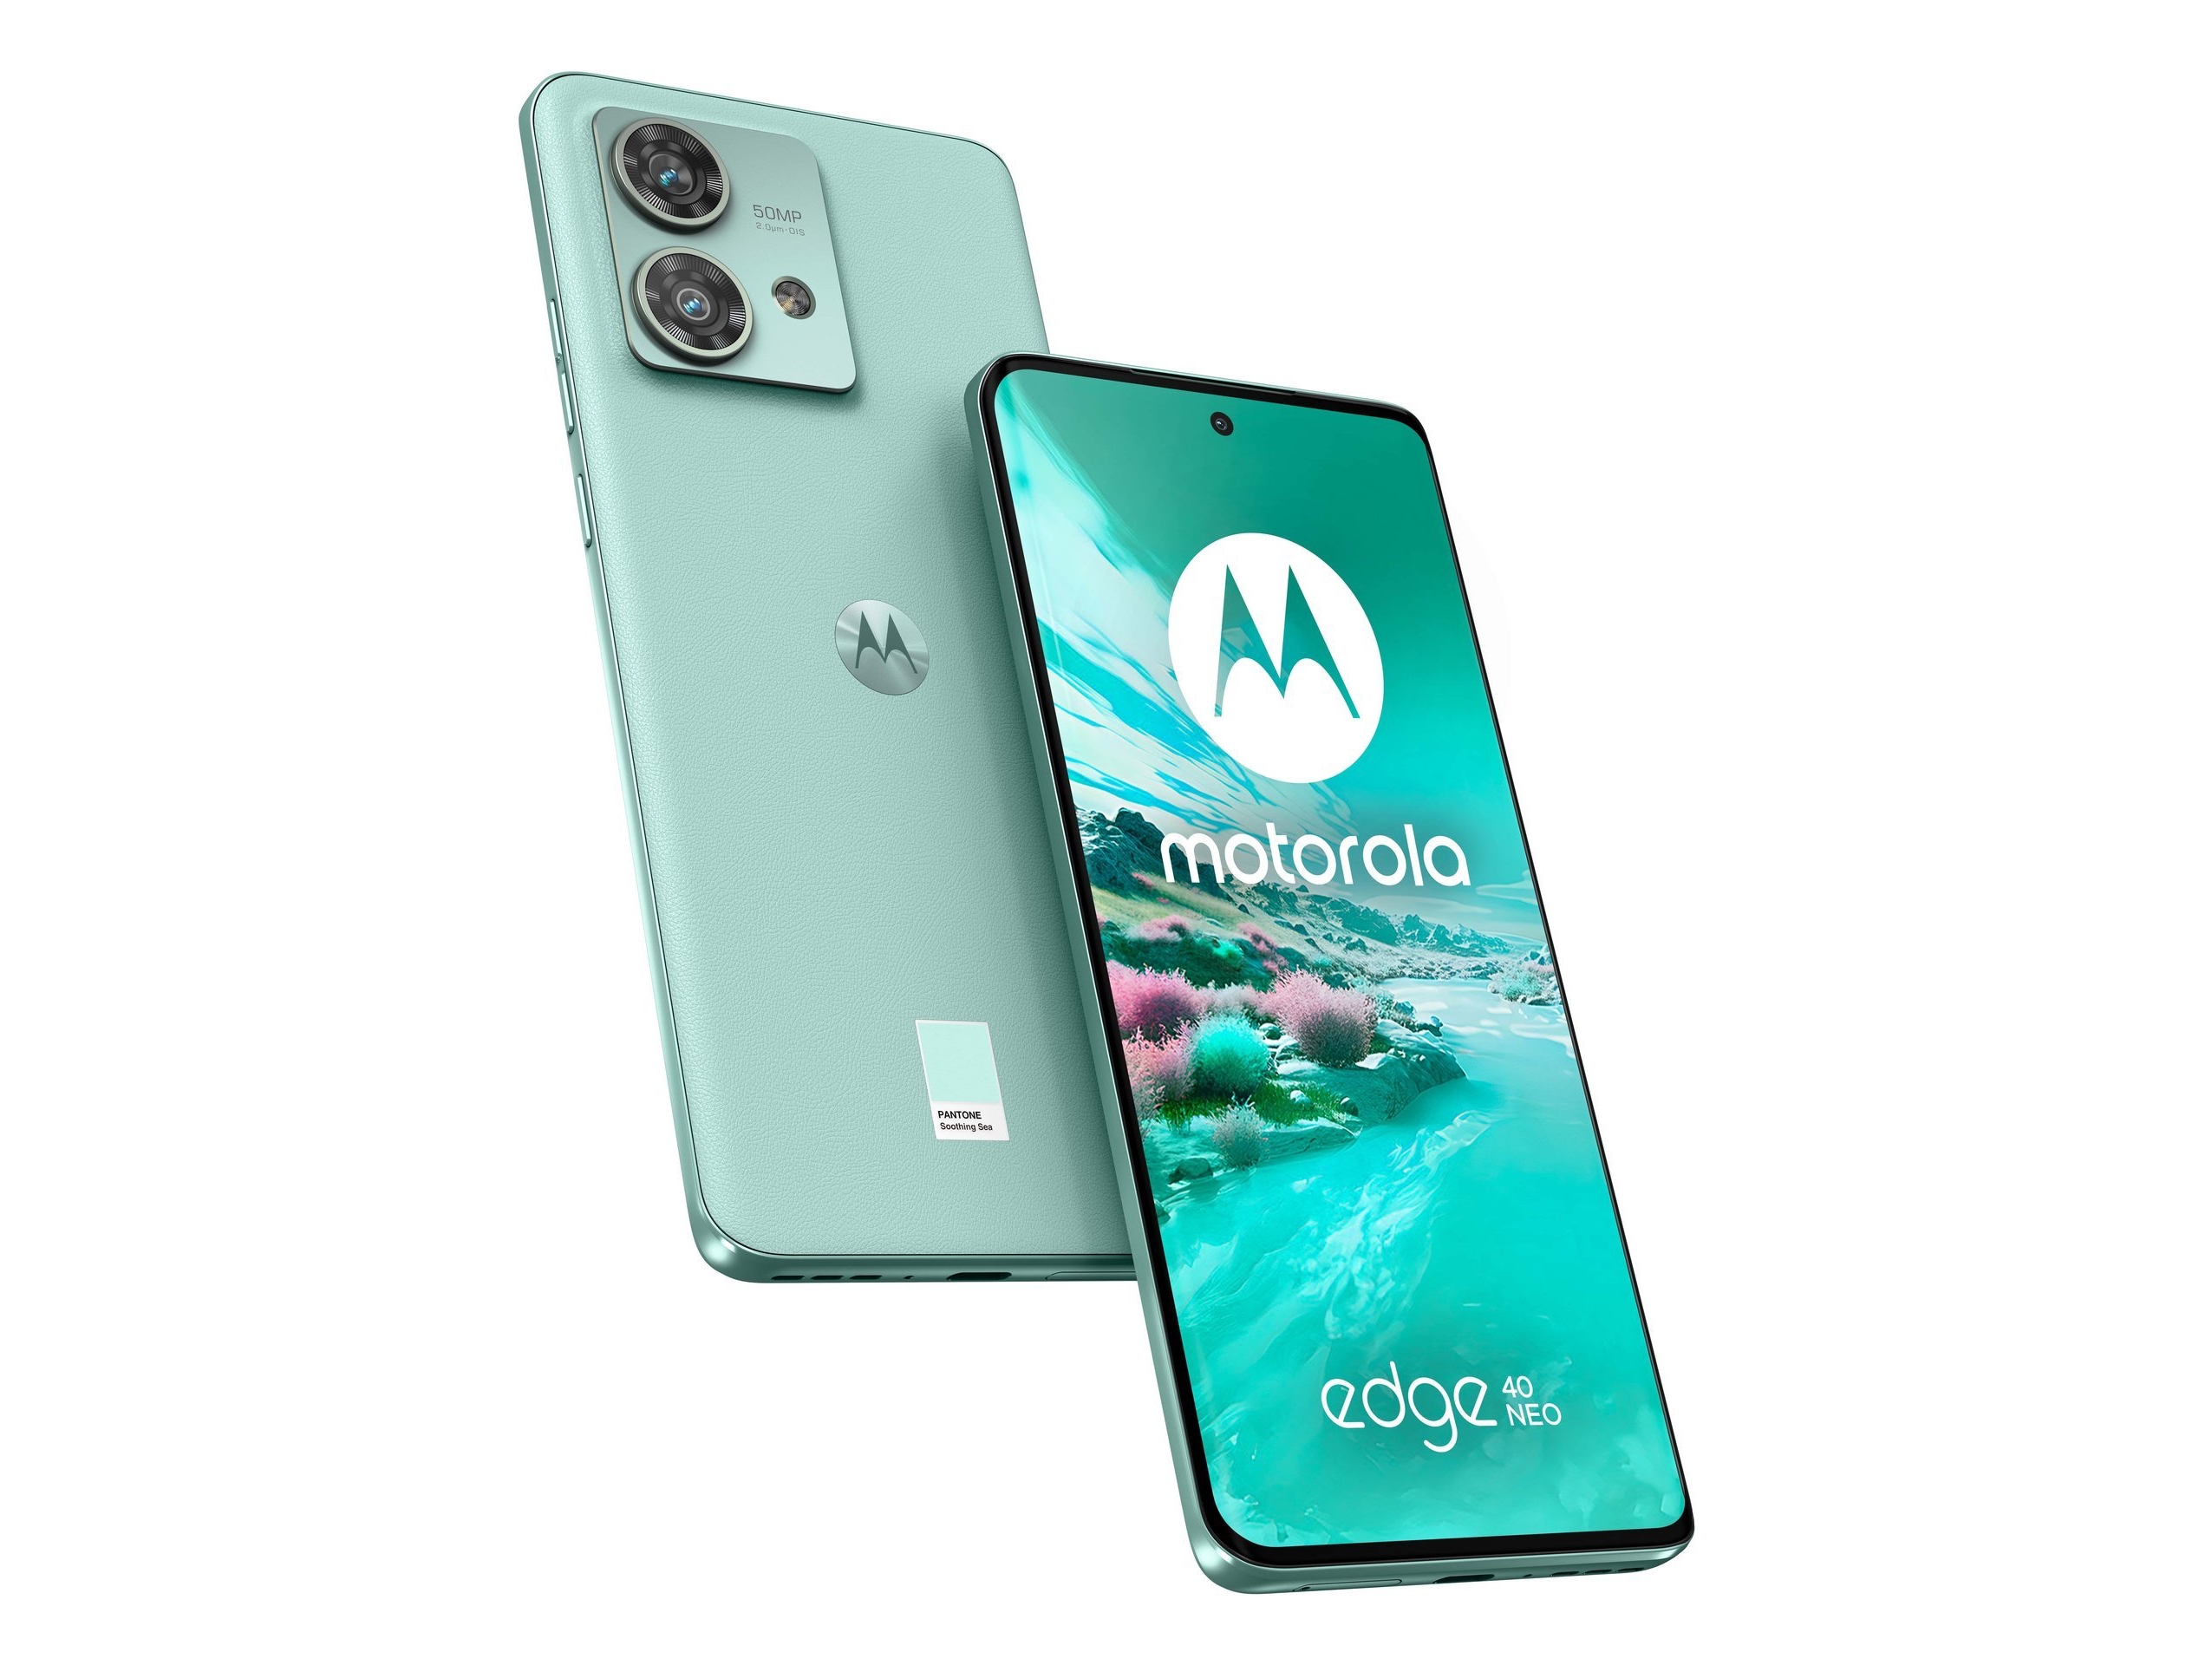 POLED display at 144Hz, Dimensity 1050 chip, IP68 protection, three colours and a price of 399 euros: an insider has revealed all the details about the Motorola Edge 40 Neo